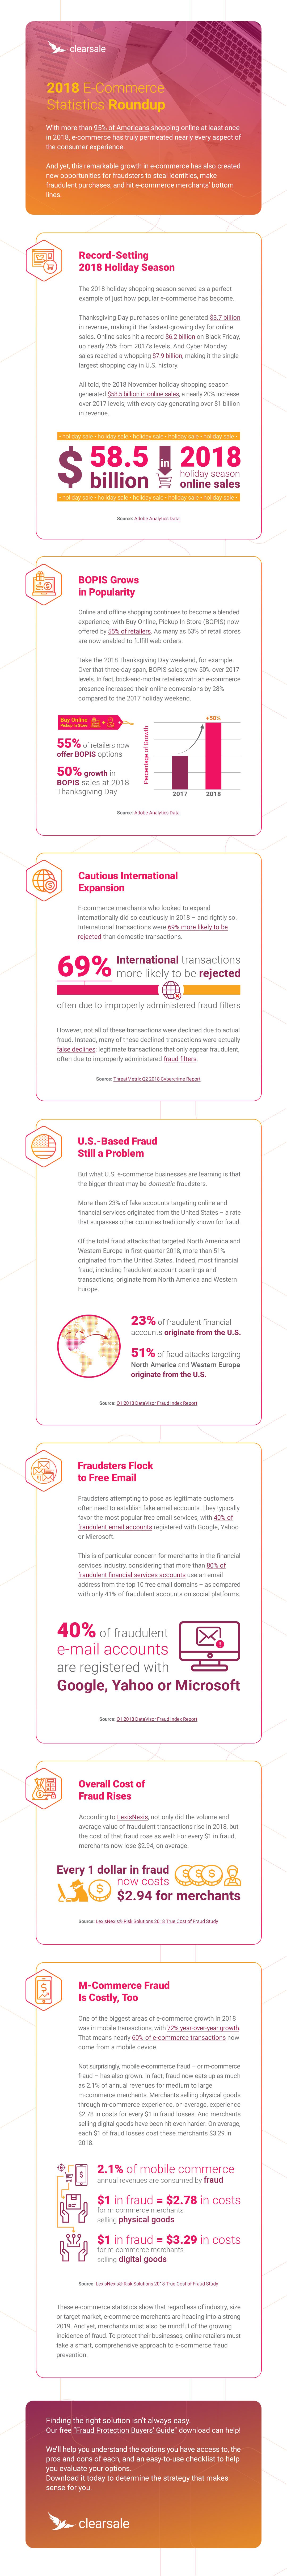 Infographic - Understanding these e-commerce statistics from 2018 can help online retailers safely grow their businesses in 2019.